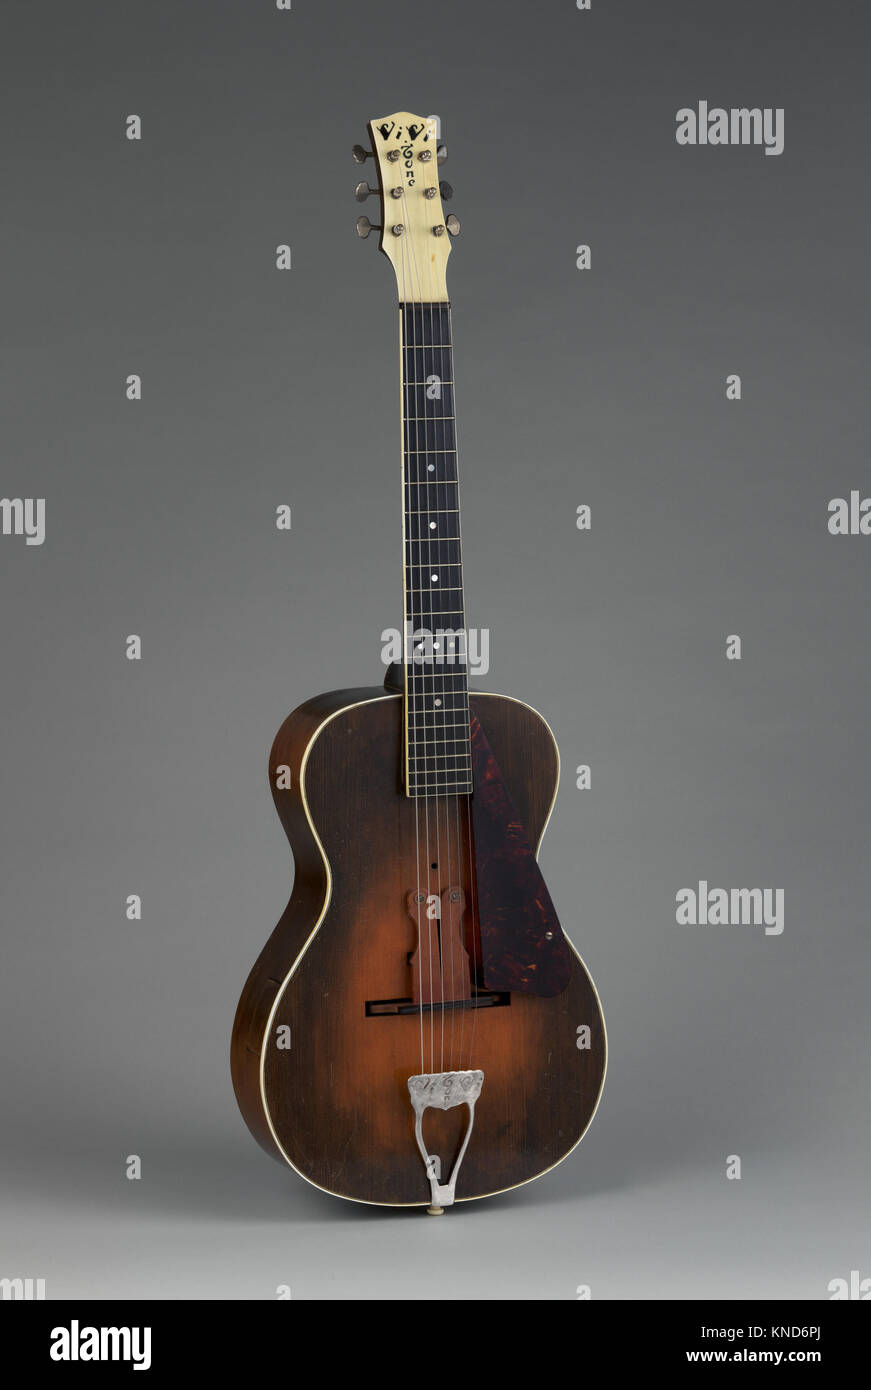 Acoustic-Electric Guitar MET DP-12319-020 718444 Maker: Vivi-Tone, American, Acoustic-Electric Guitar, ca. 1933, Spruce, maple, mahogany, ebony, Height: 39 1/8 in. (99.4 cm) Width (At lower bout): 13 1/8 in. (33.3 cm) Depth (At side of rim): 3 3/4 in. (9.5 cm). The Metropolitan Museum of Art, New York. Purchase, Steve Miller Gift, 2016 (2016.415a, b) Stock Photo